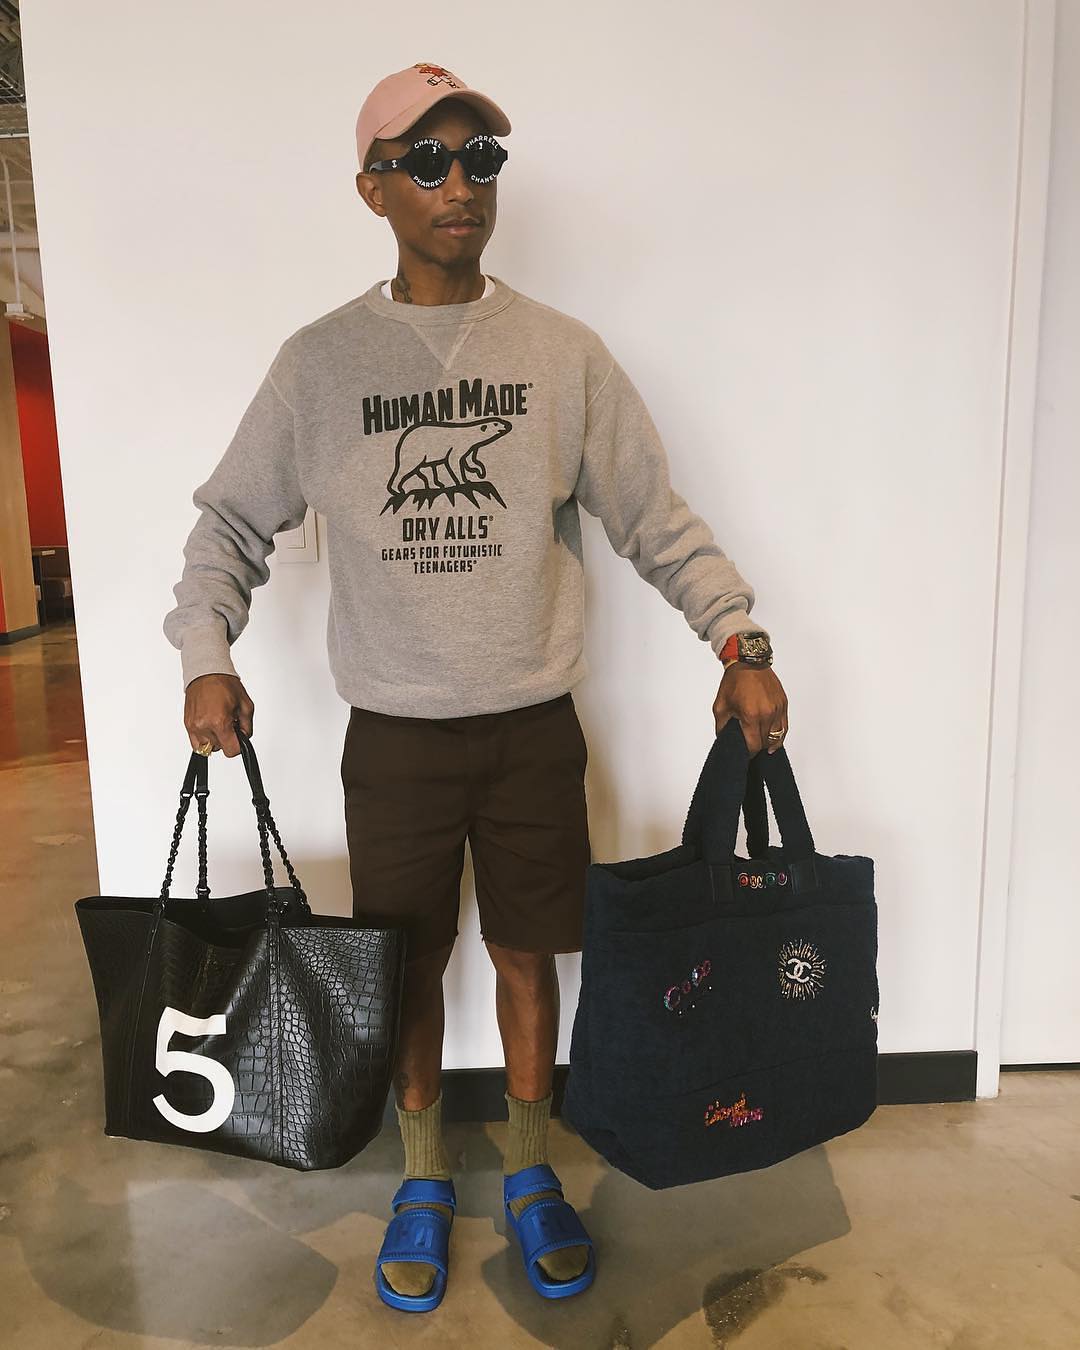 SPOTTED: Pharrell Launches 'Chanel Pharrell' Collection in LA – PAUSE Online | Men's Fashion, Street Style, News Streetwear